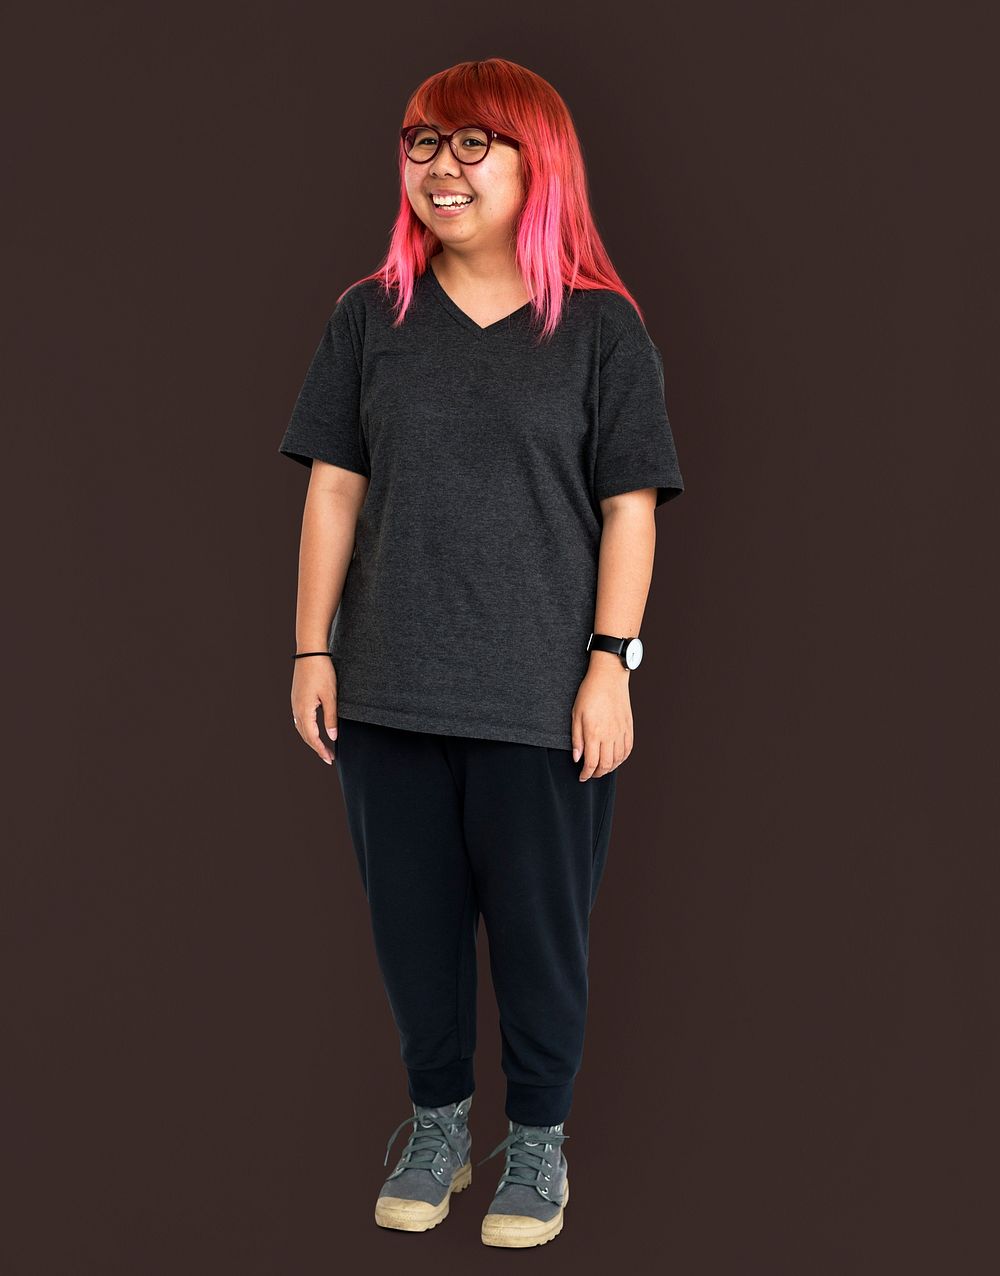 Young adult asian girl standing and smiling studio portrait